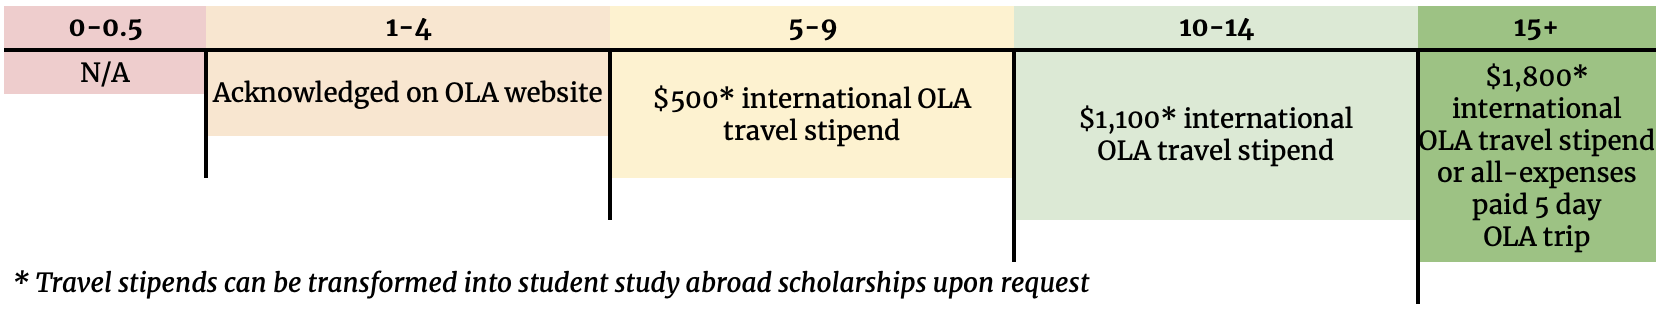 Point Scale: Earn 1 to 4 points to be acknowledged on the Learning Abroad website. Earn 5 to 9 points to earn a $500 international travel stipend. Earn 10-14 points to earn a $1,100 international travel stipend. Earn more than 15 points to receive a $1,800 international travel stipend or an all-expenses paid 5 day international trip on behalf of the Learning Abroad office. Travel stipends can be transformed into student study abroad scholarships upon request.  